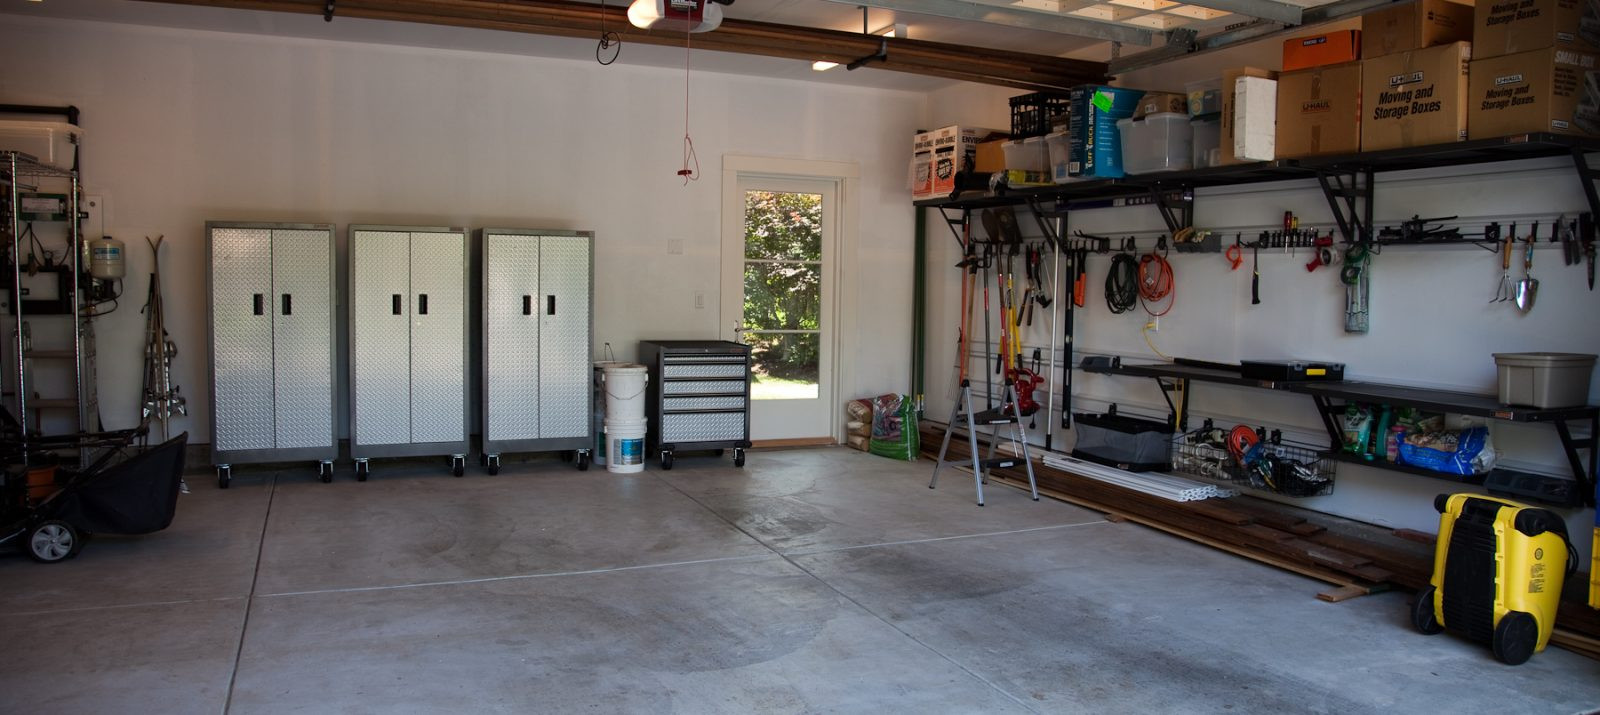 Organize Your Garage
 How To Easily Clean And Organize Your Garage [Infographic]